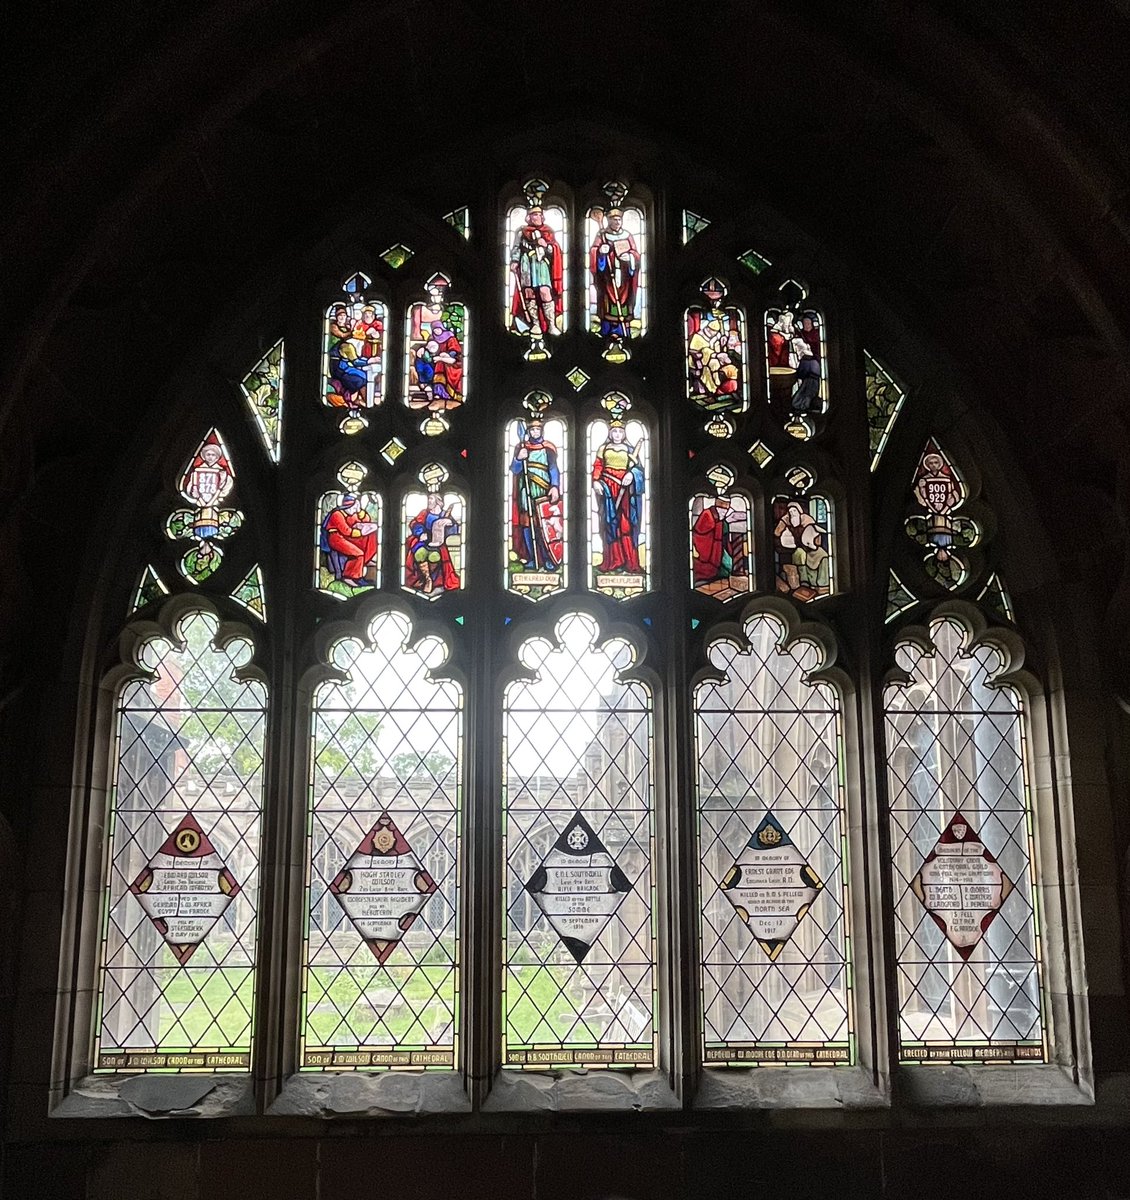 War memorial window. The cloisters, Worcester Cathedral, Worcester, Worcestershire. Contains five tributes commemorating people who died in the Great War. #LestWeForget